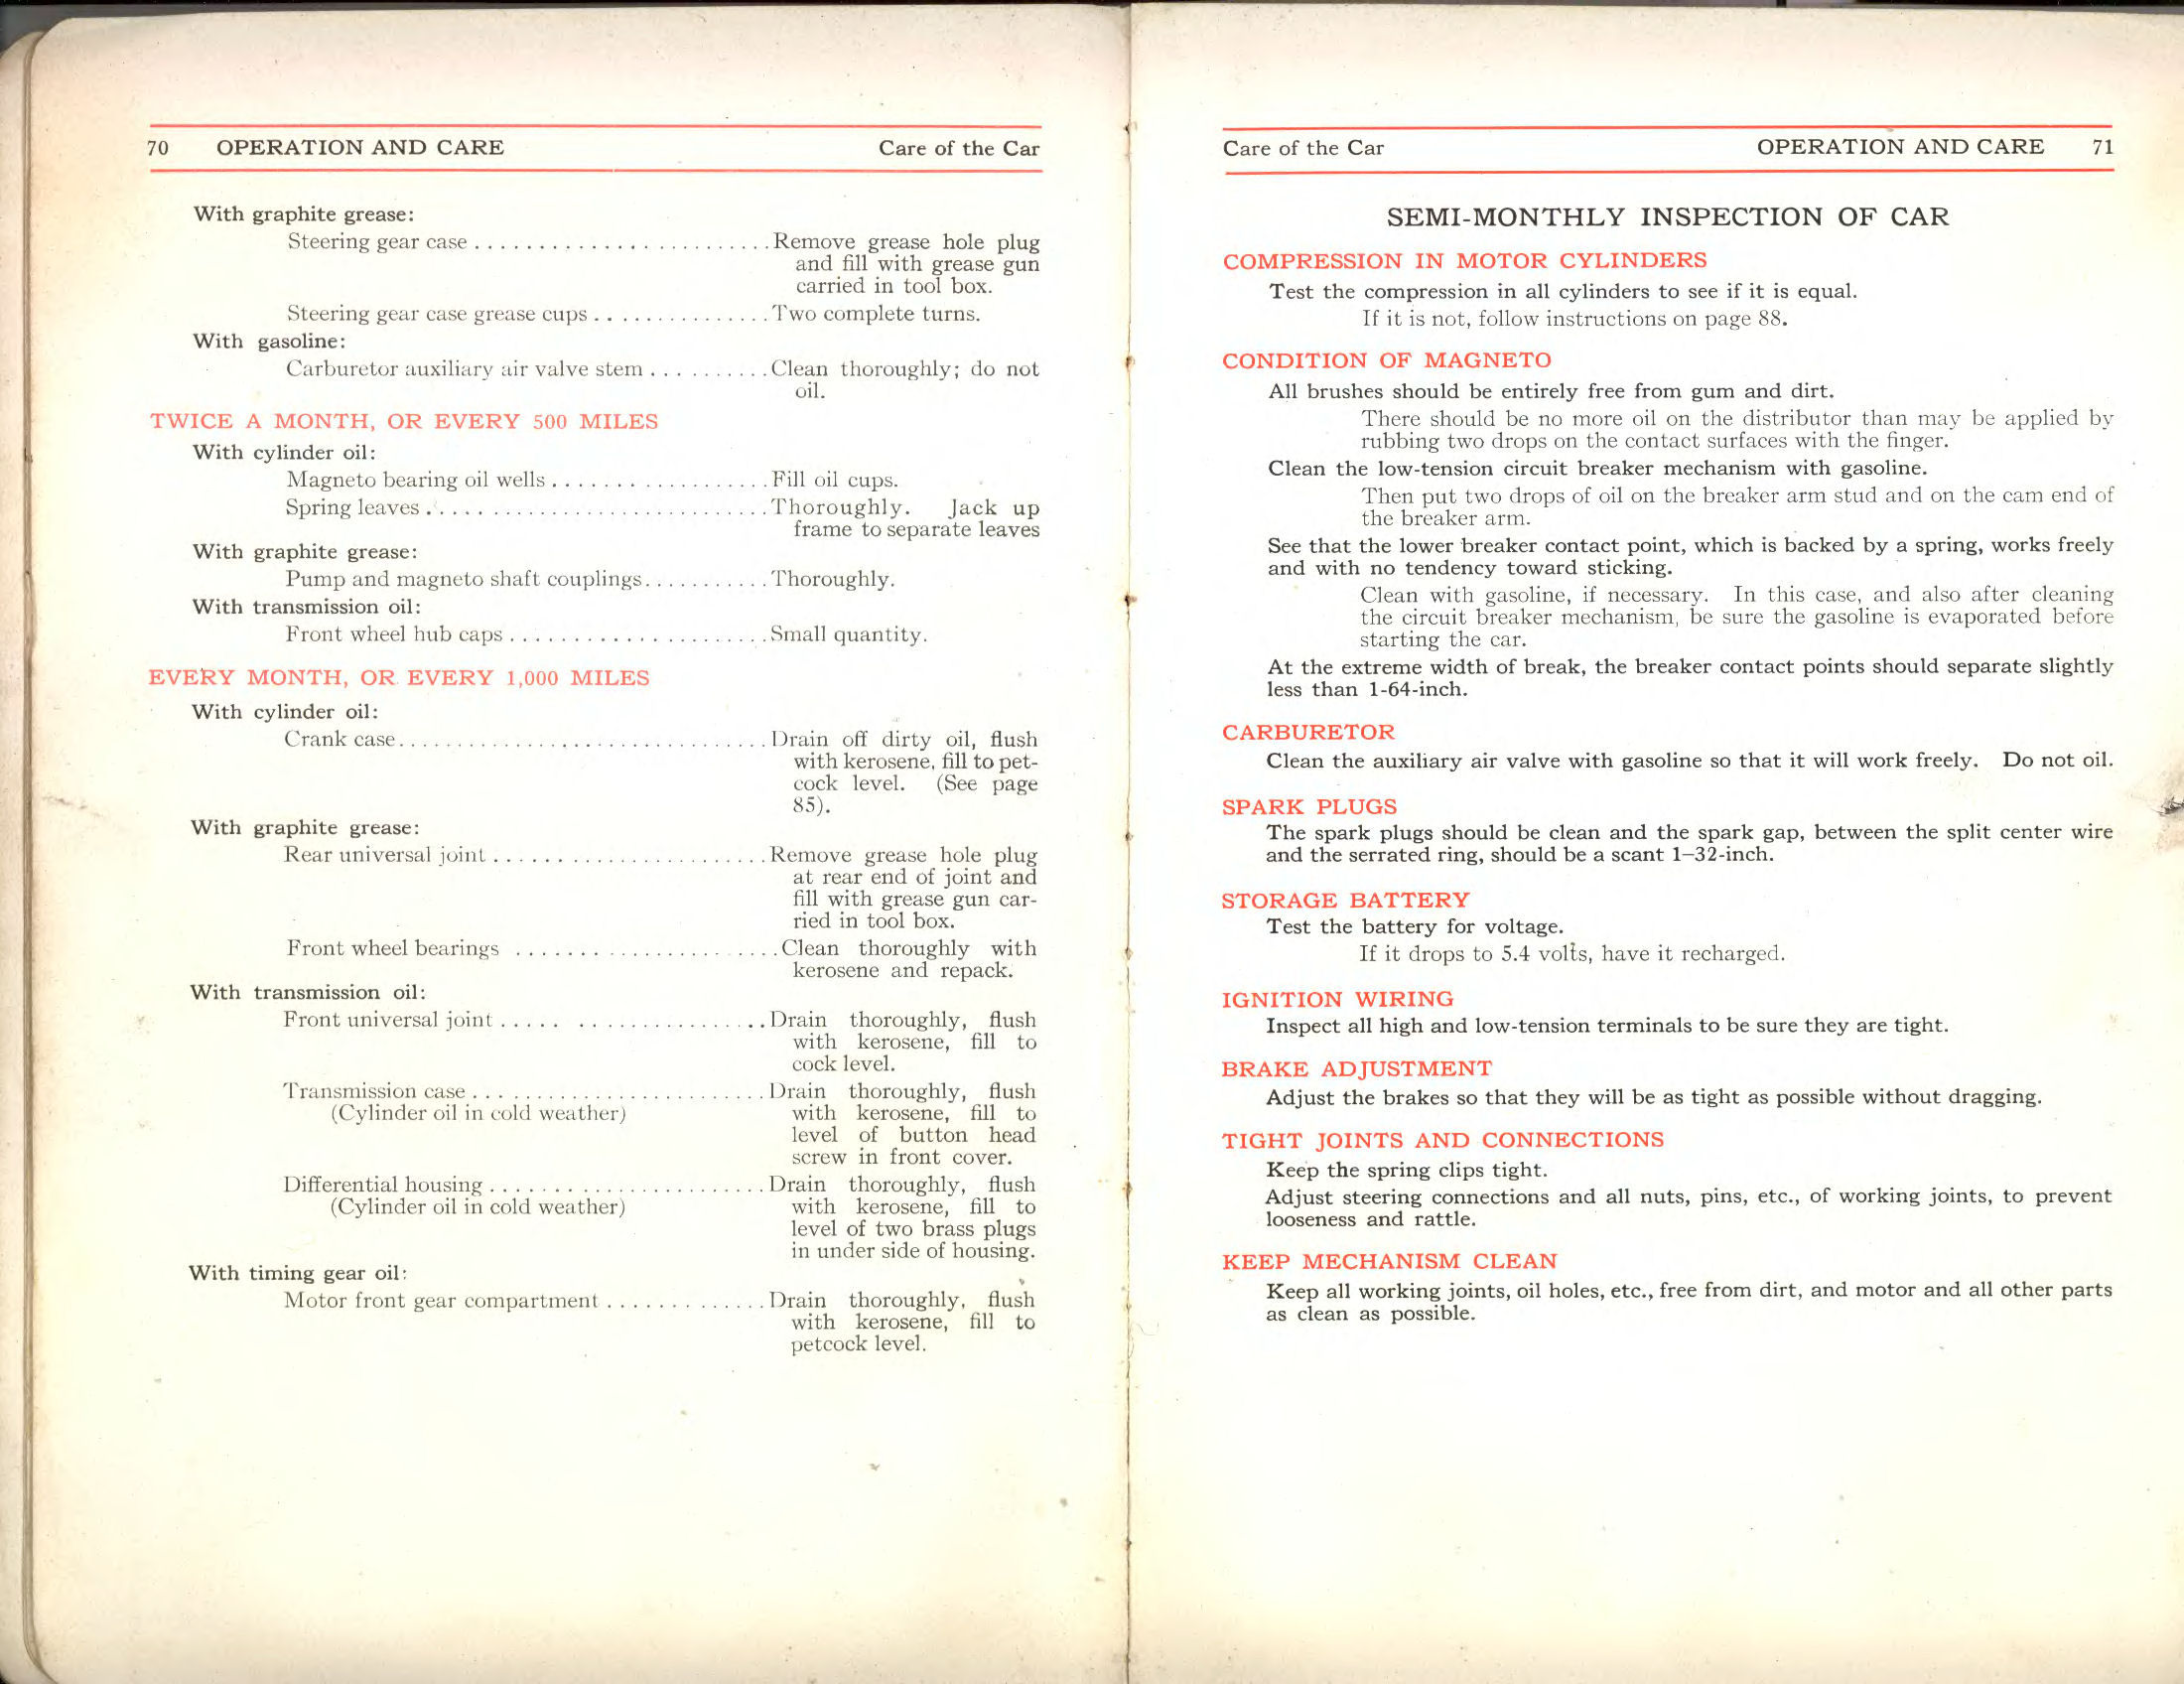 1911 Packard Owners Manual Page 13